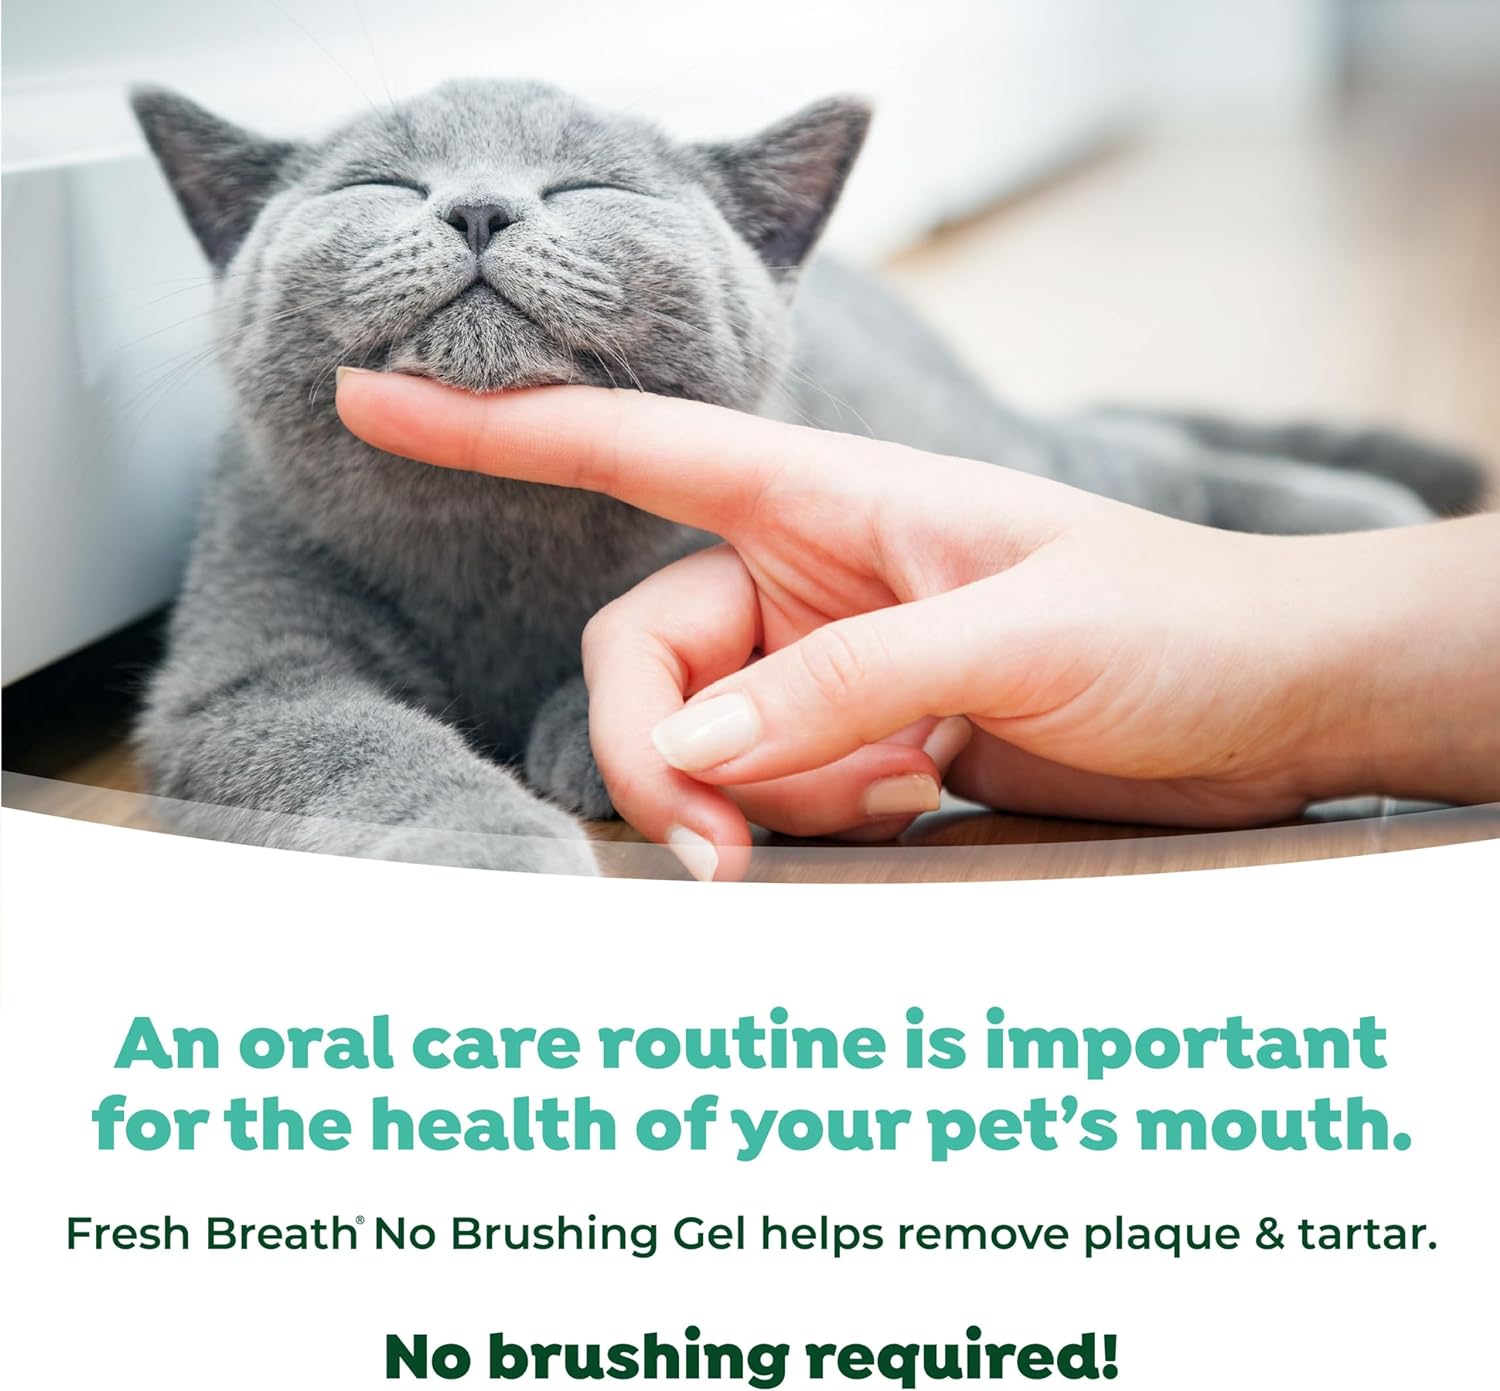 TropiClean Fresh Breath for Cats | No Brush Dental Gel for Cats | Cat Breath Freshener Toothpaste for Plaque, Tartar & Stinky Breath | Made in the USA | 2 oz. : Pet Dental Care Supplies : Pet Supplies